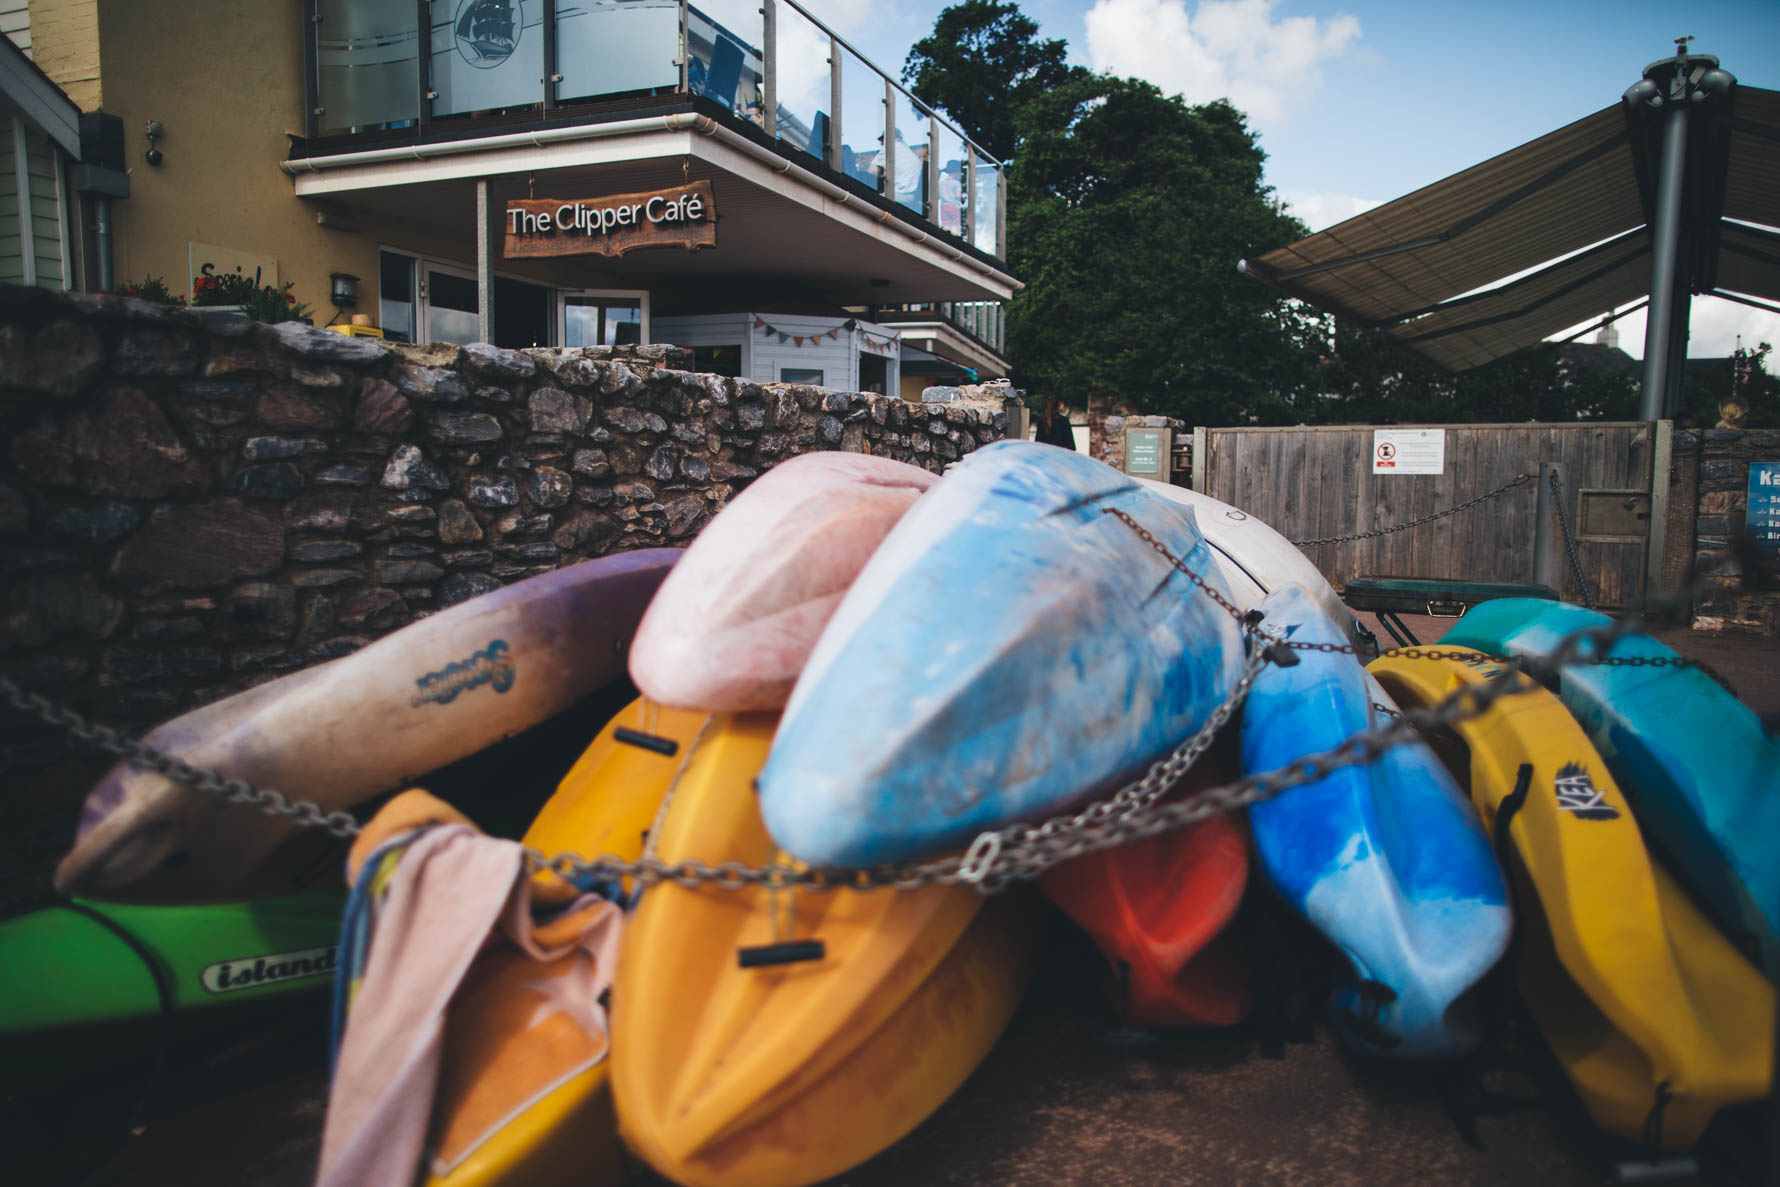 Colourful kayaks stacked up in front of a stone wall in front of The Clipper Cafe